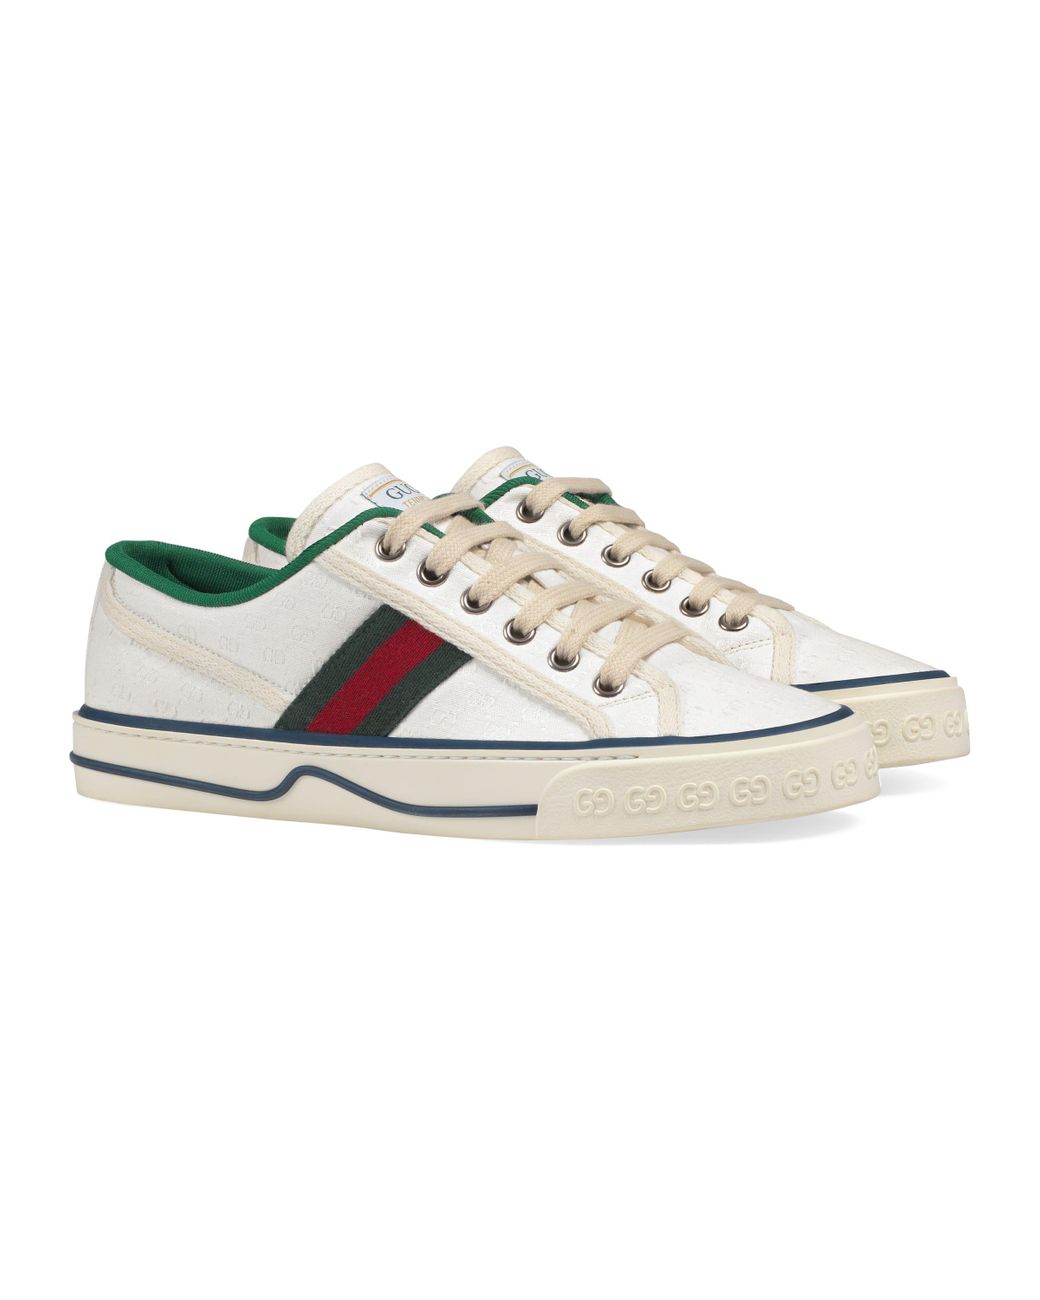 Gucci Tennis 1977 Sneaker in Blue (White) - Save 15% - Lyst